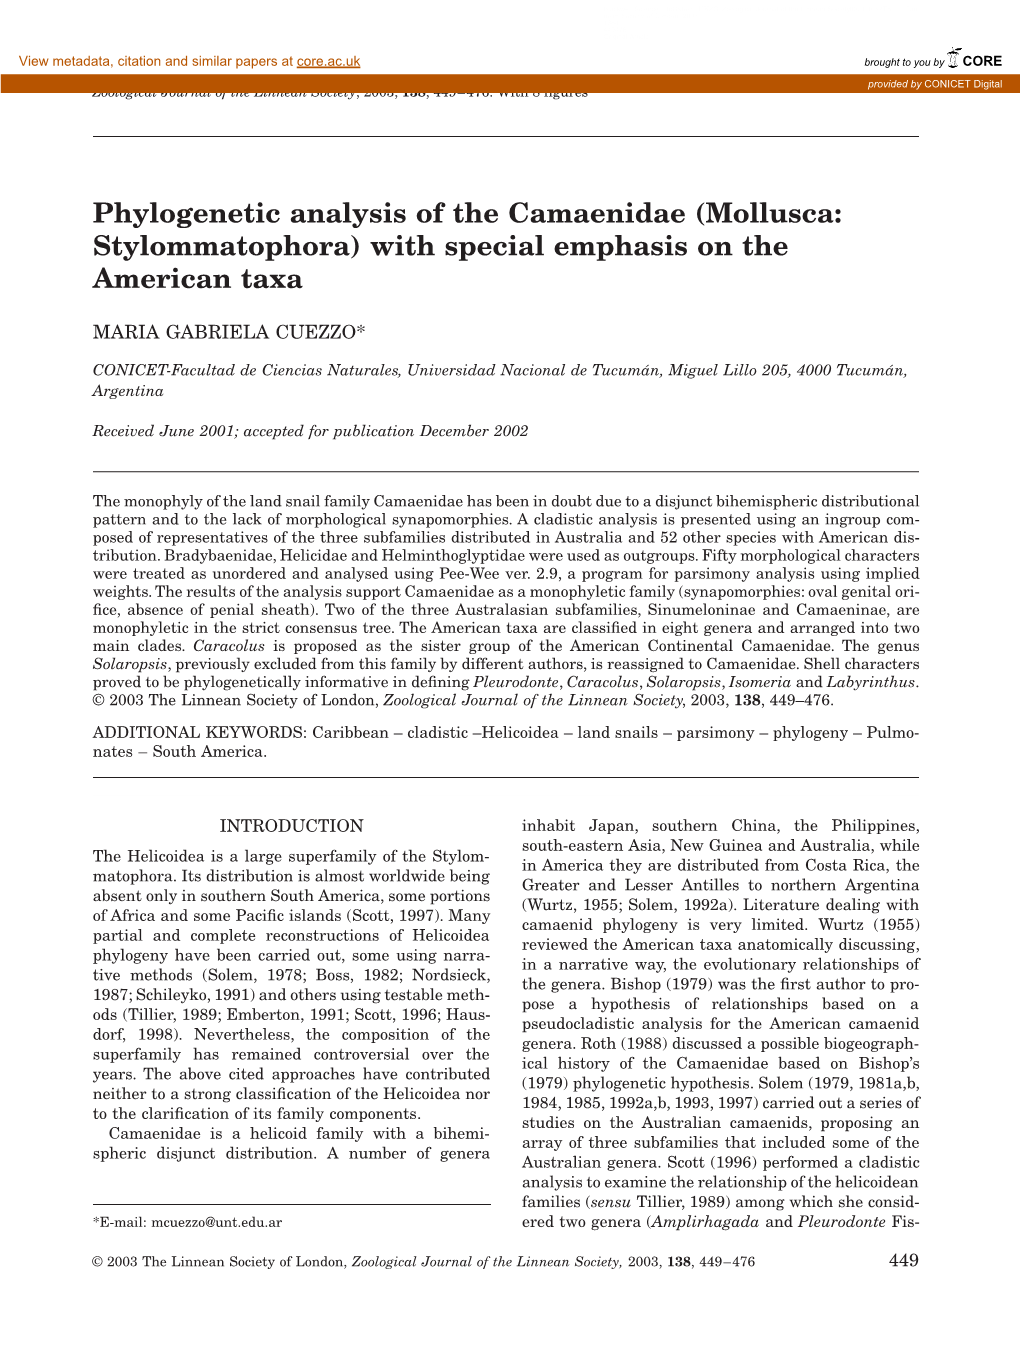 Phylogenetic Analysis of the Camaenidae (Mollusca: Stylommatophora) with Special Emphasis on the American Taxa